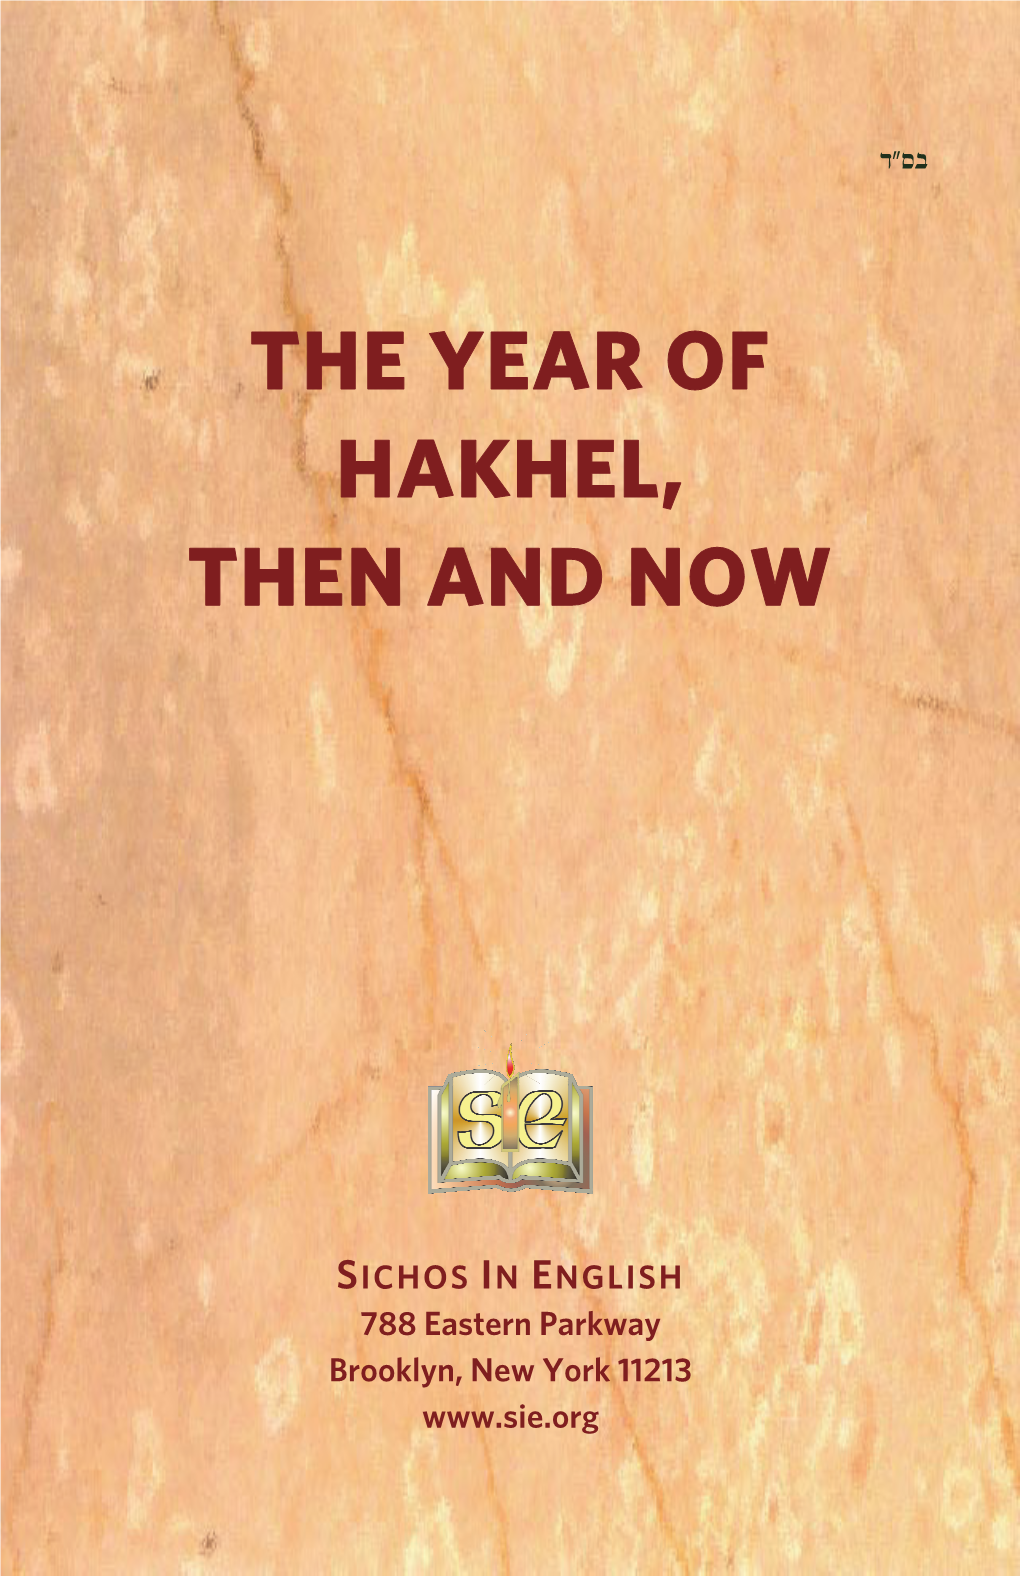 The Year of Hakhel, Then and Now